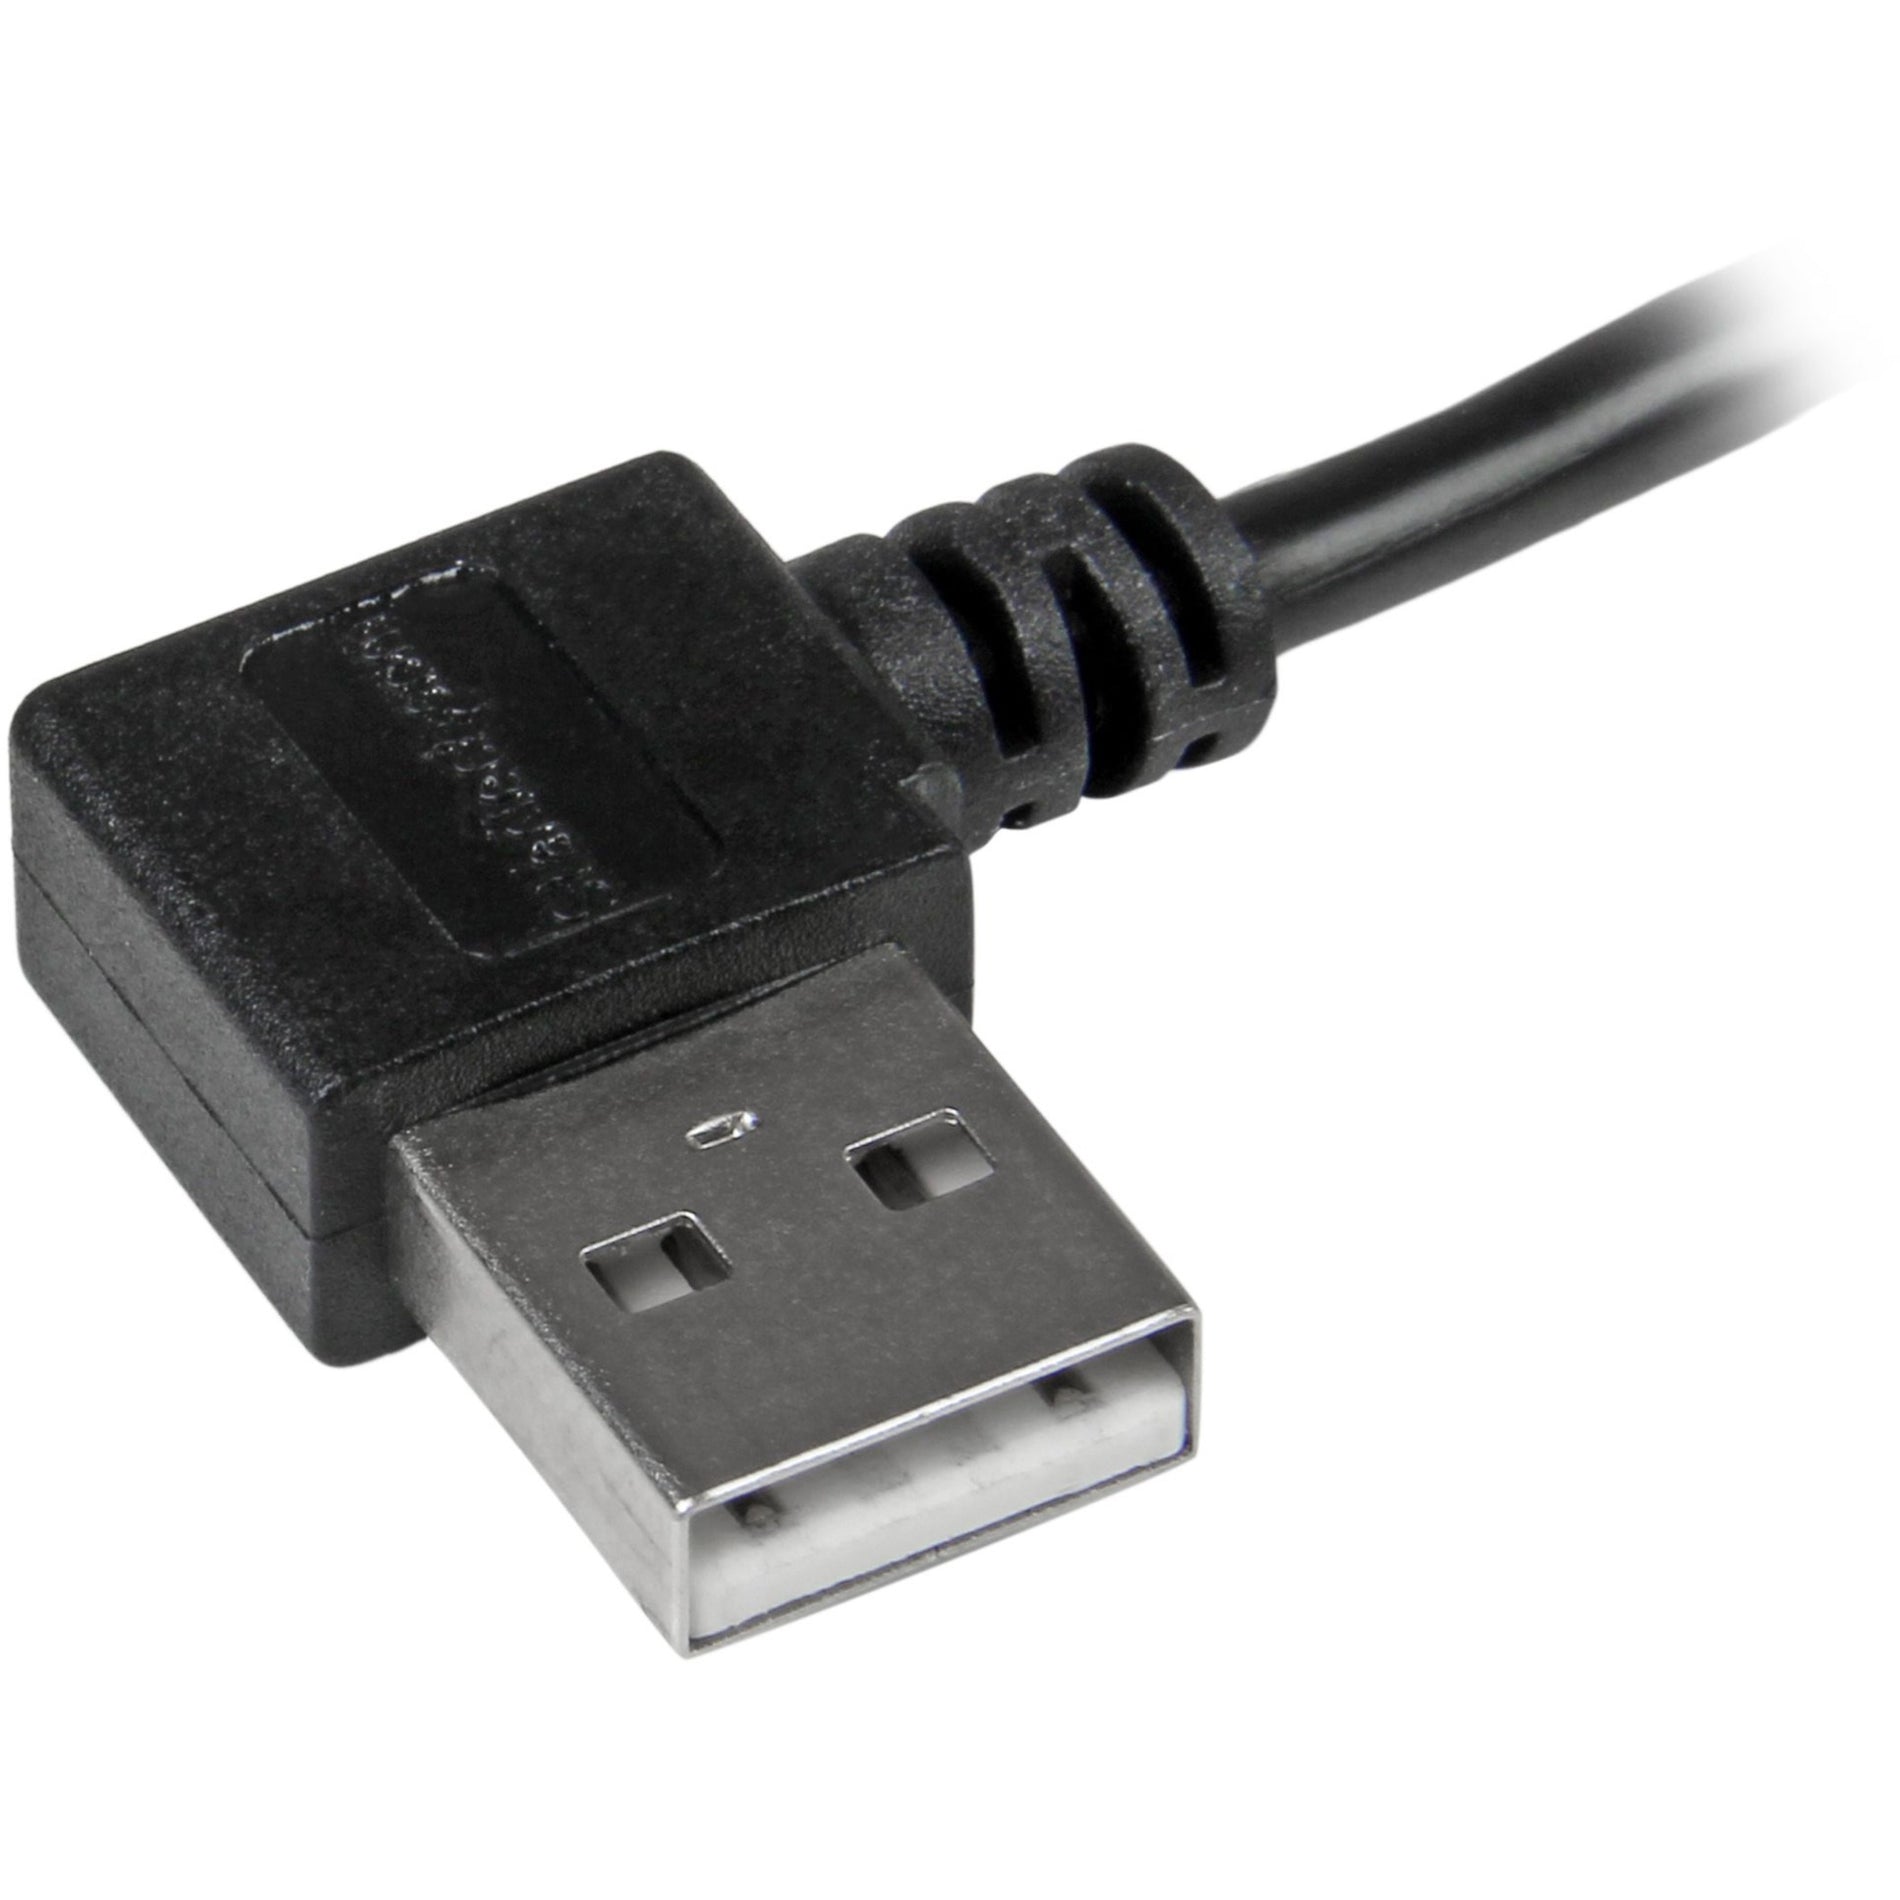 StarTech.com USB2AUB2RA2M Micro-USB Cable with Right-Angled Connectors - M/M - 2m (6ft), Fast Charging, Bend Resistant